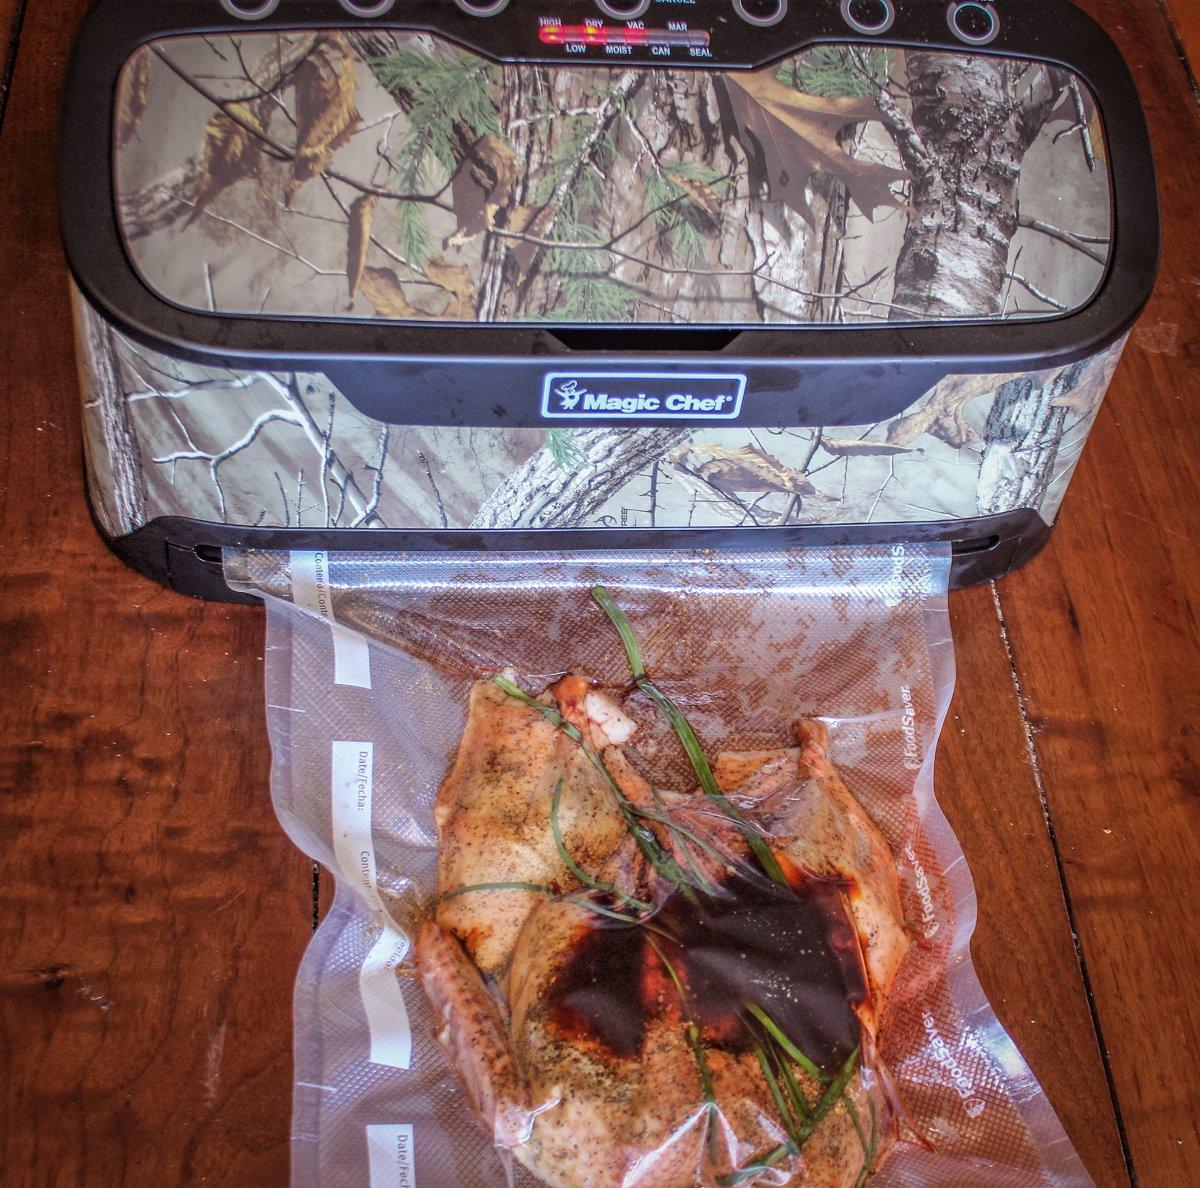 The new Magic Chef Vacuum Sealer has a handy bag compartment in the top and starts instantly when you insert the bag.